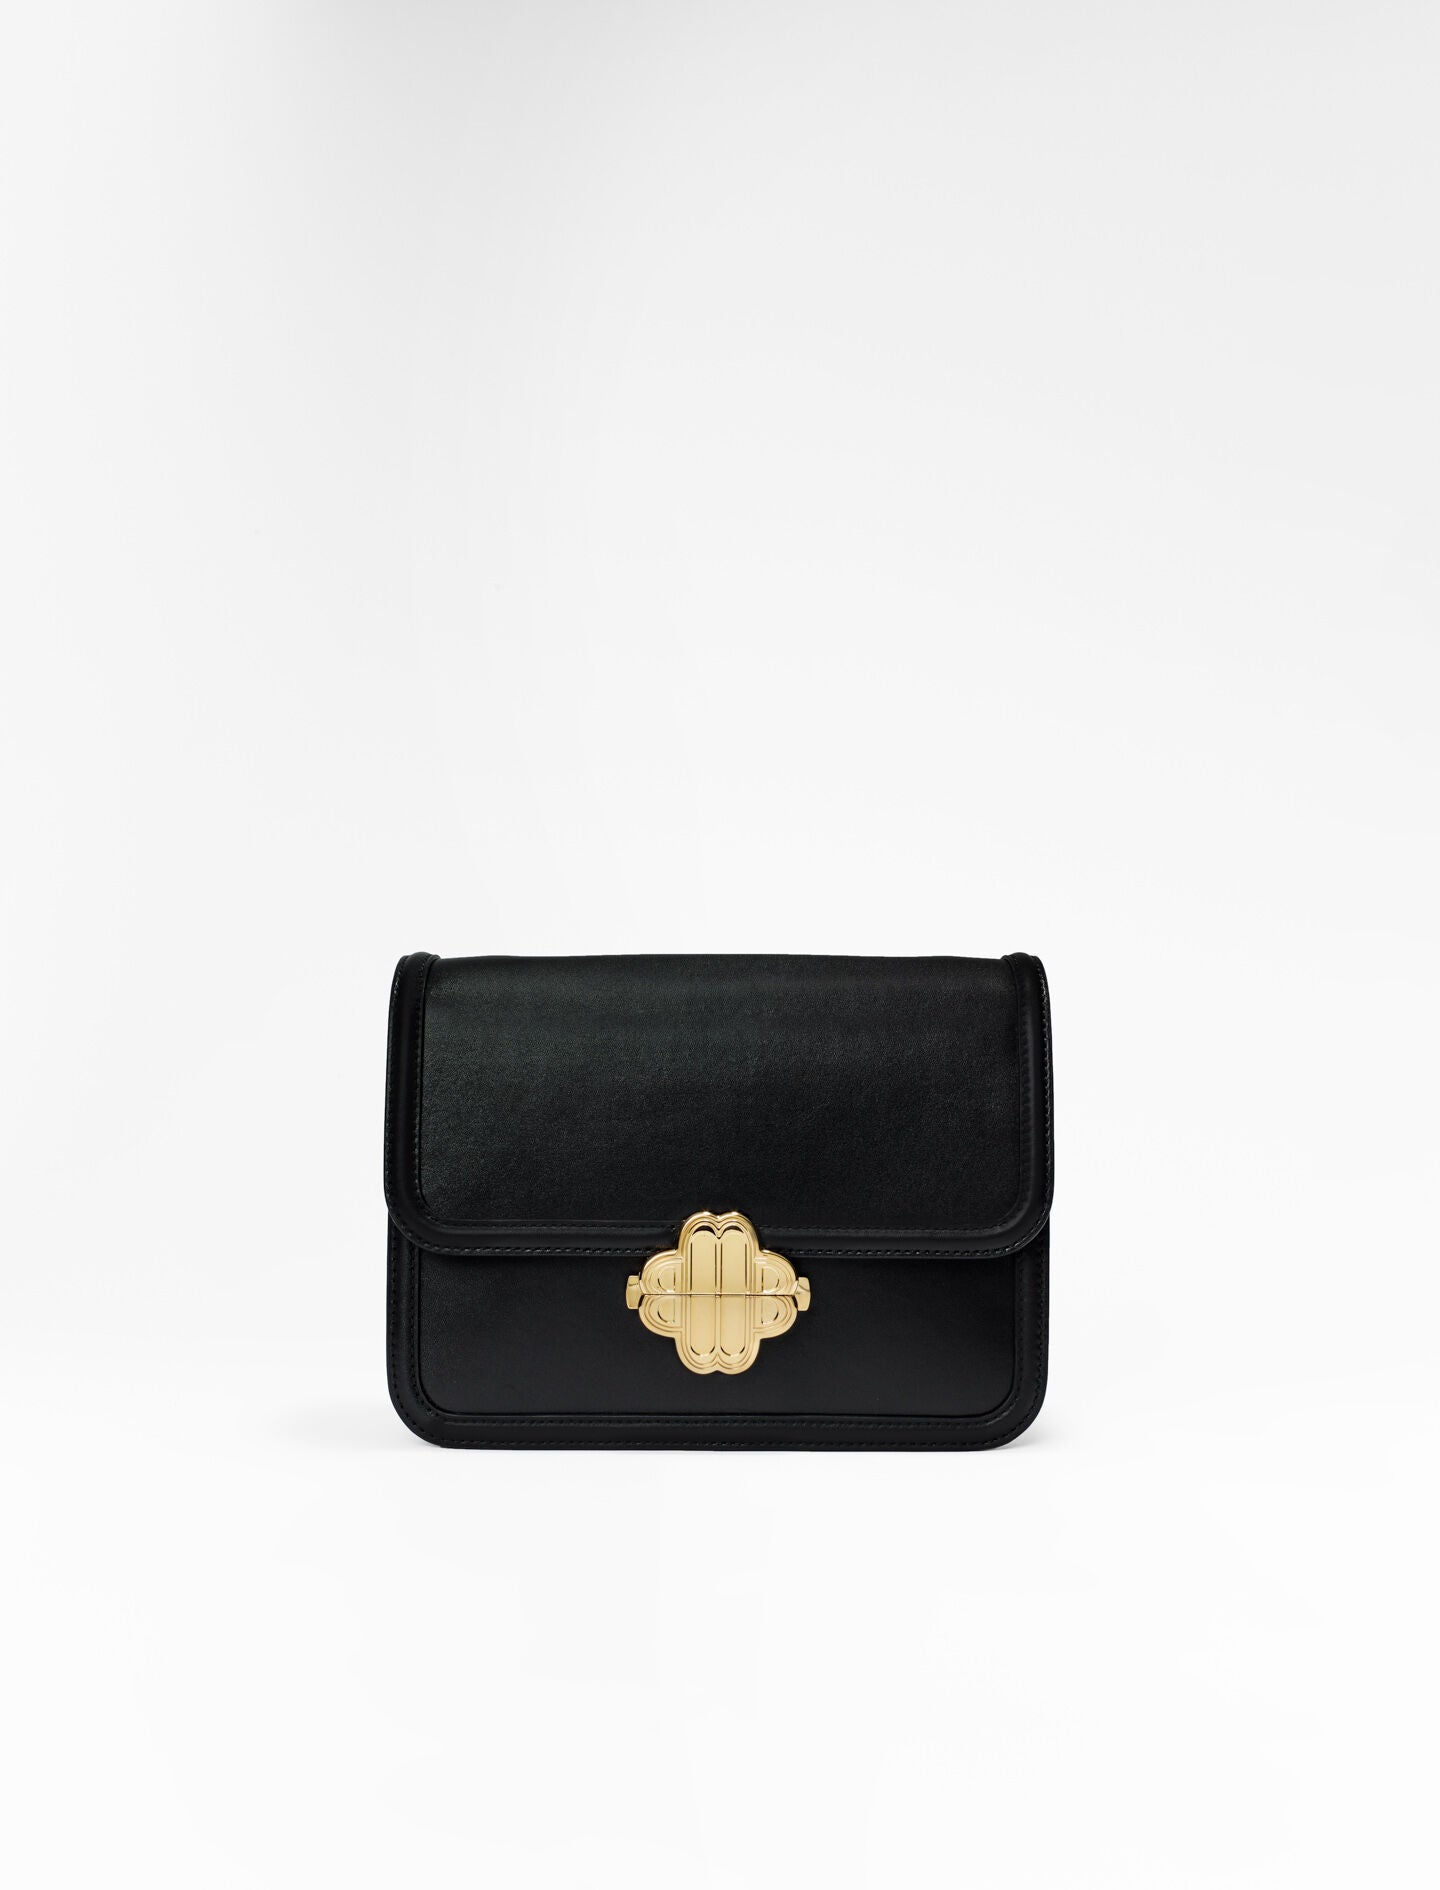 Leather bag with clover clasp